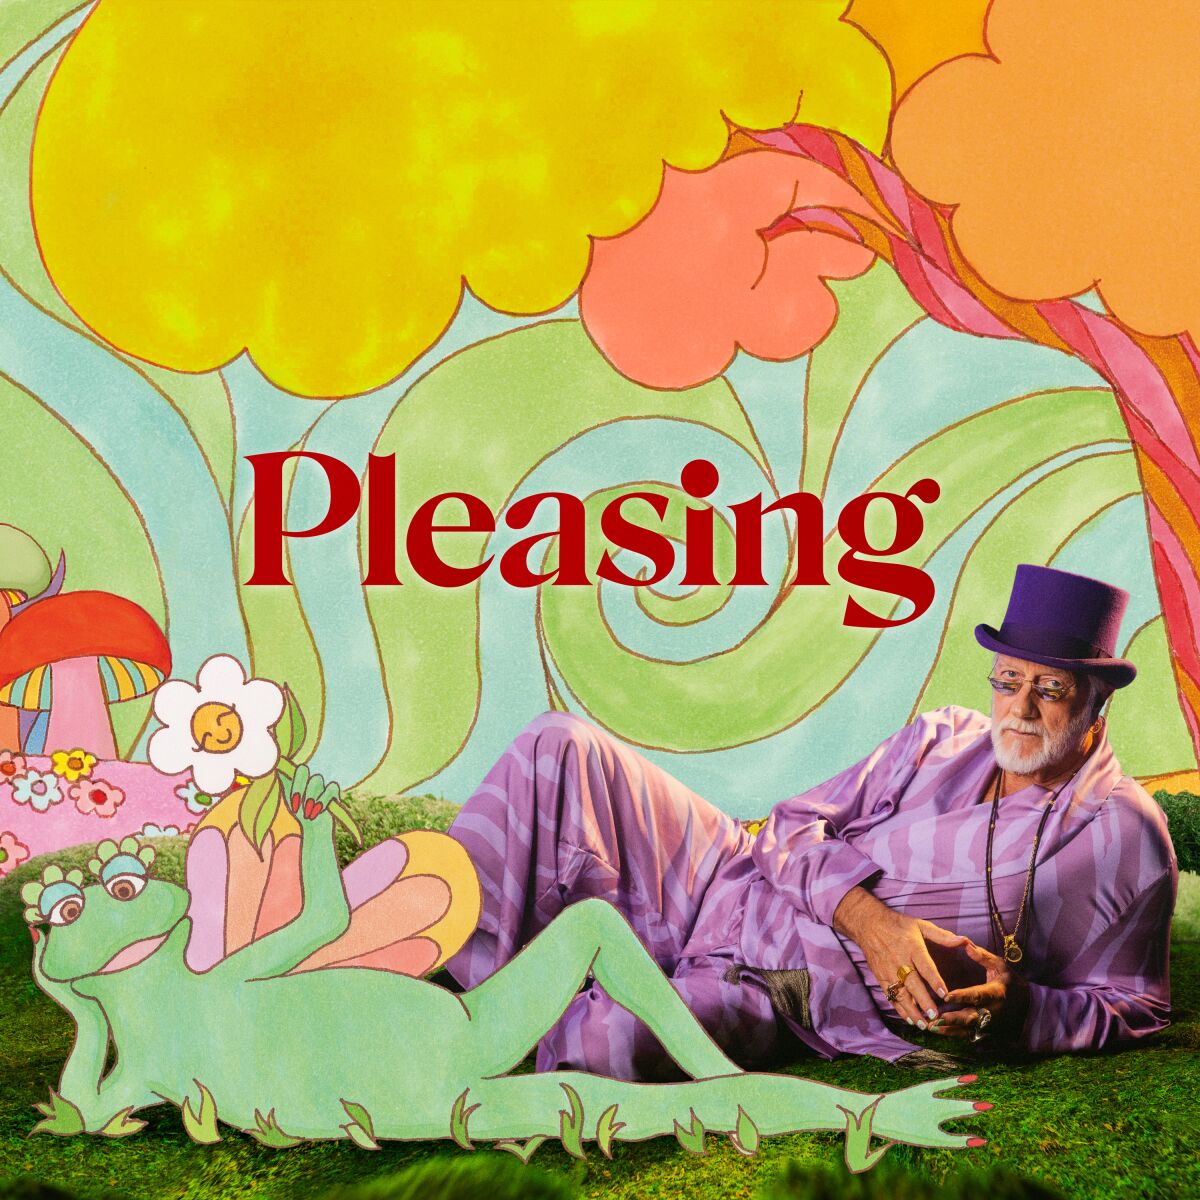 A man in a lavendar suit lying down in grass next to an illustrated frog